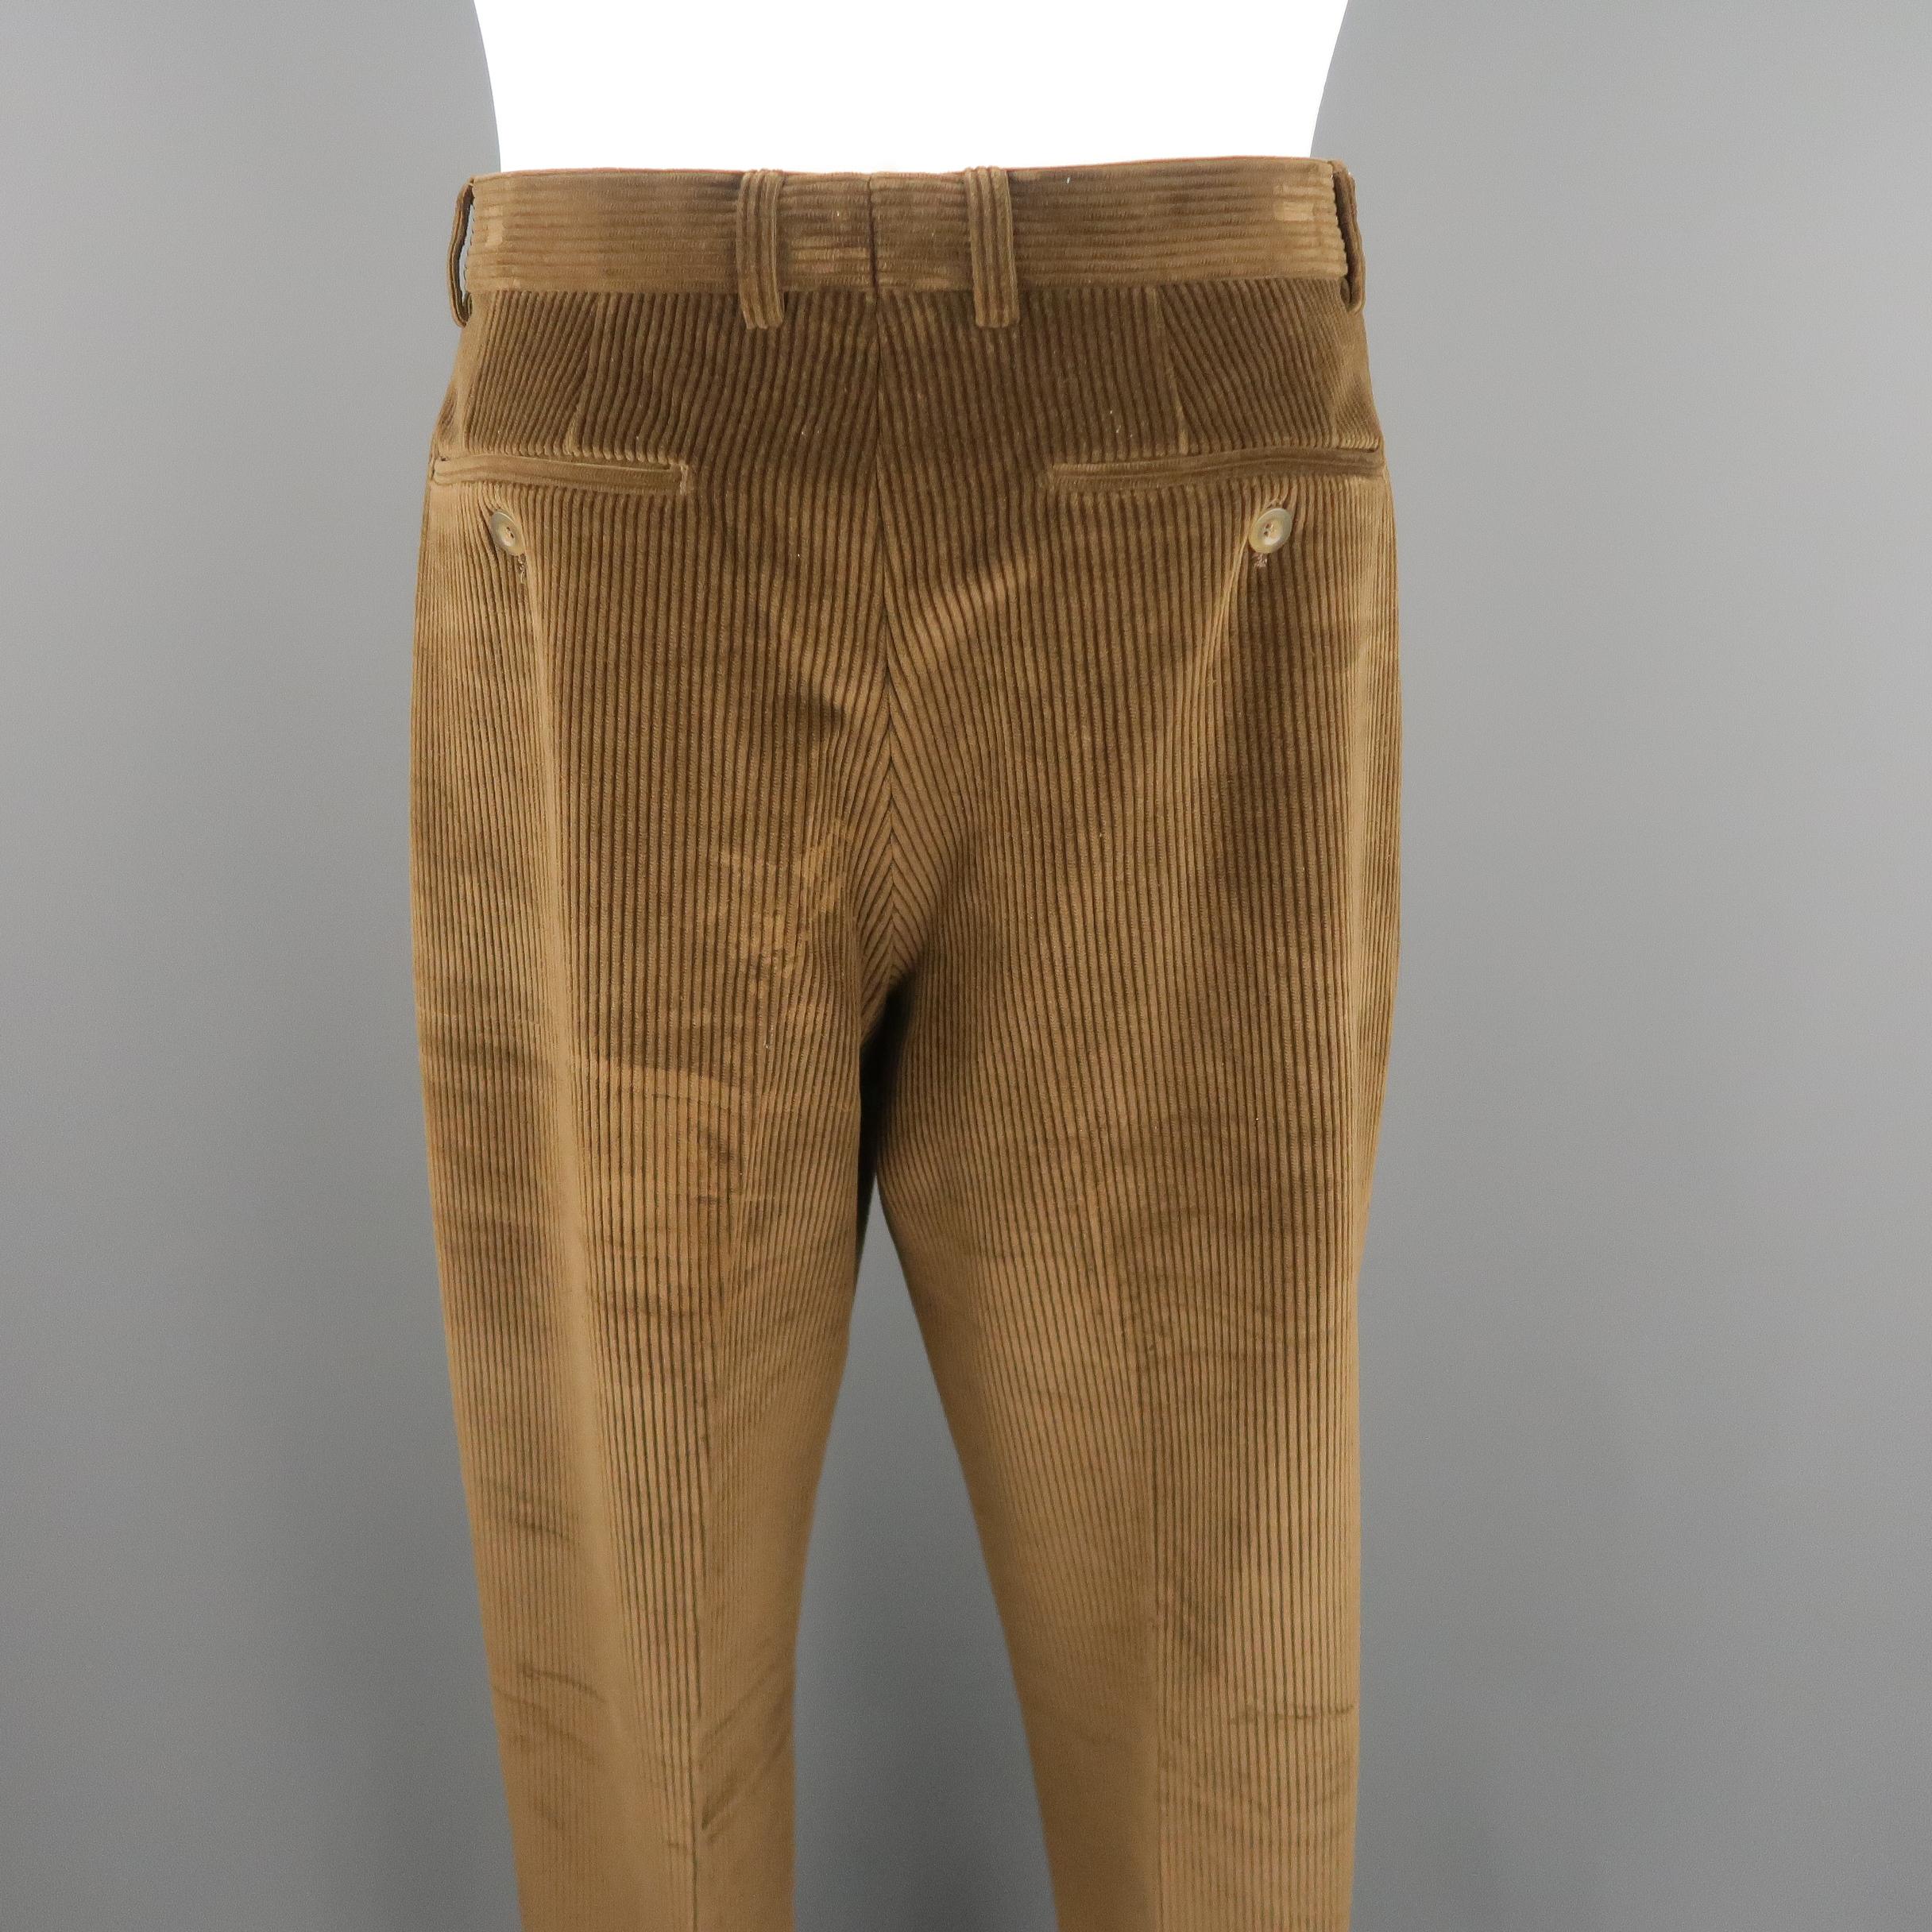 zegna evening trousers for men